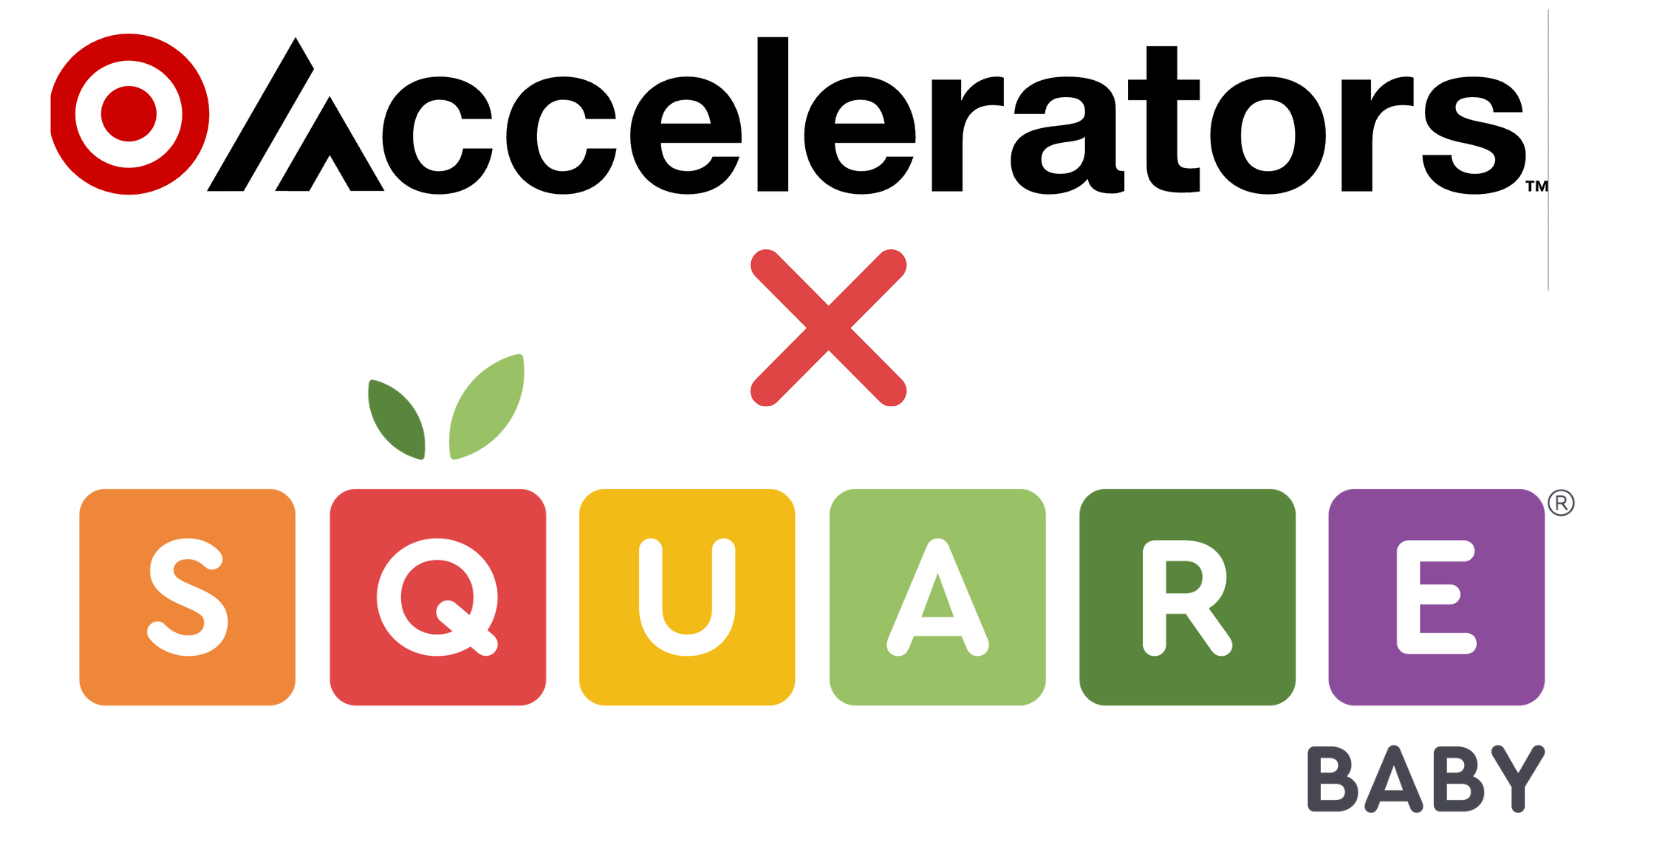 Target Accelerators and Square Baby